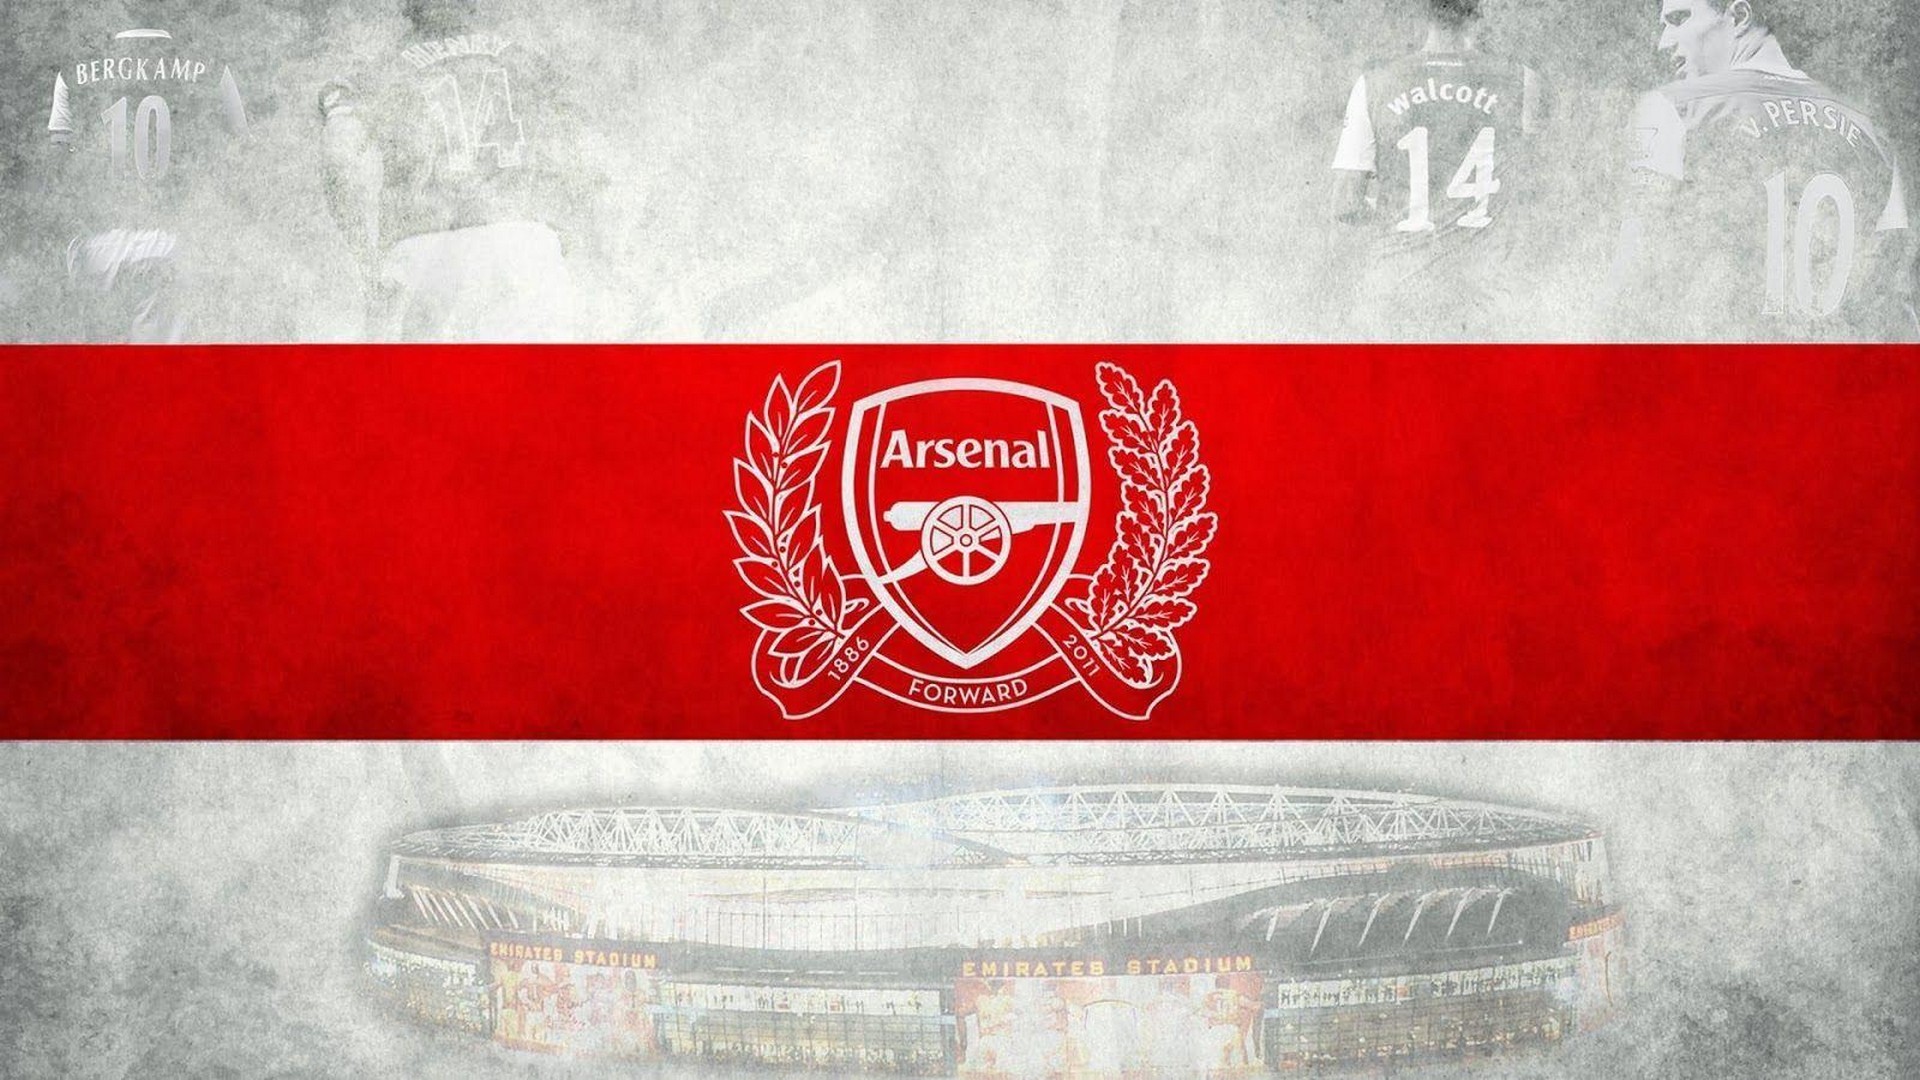 Wallpapers HD Arsenal Football Club with resolution 1920x1080 pixel. You can make this wallpaper for your Mac or Windows Desktop Background, iPhone, Android or Tablet and another Smartphone device